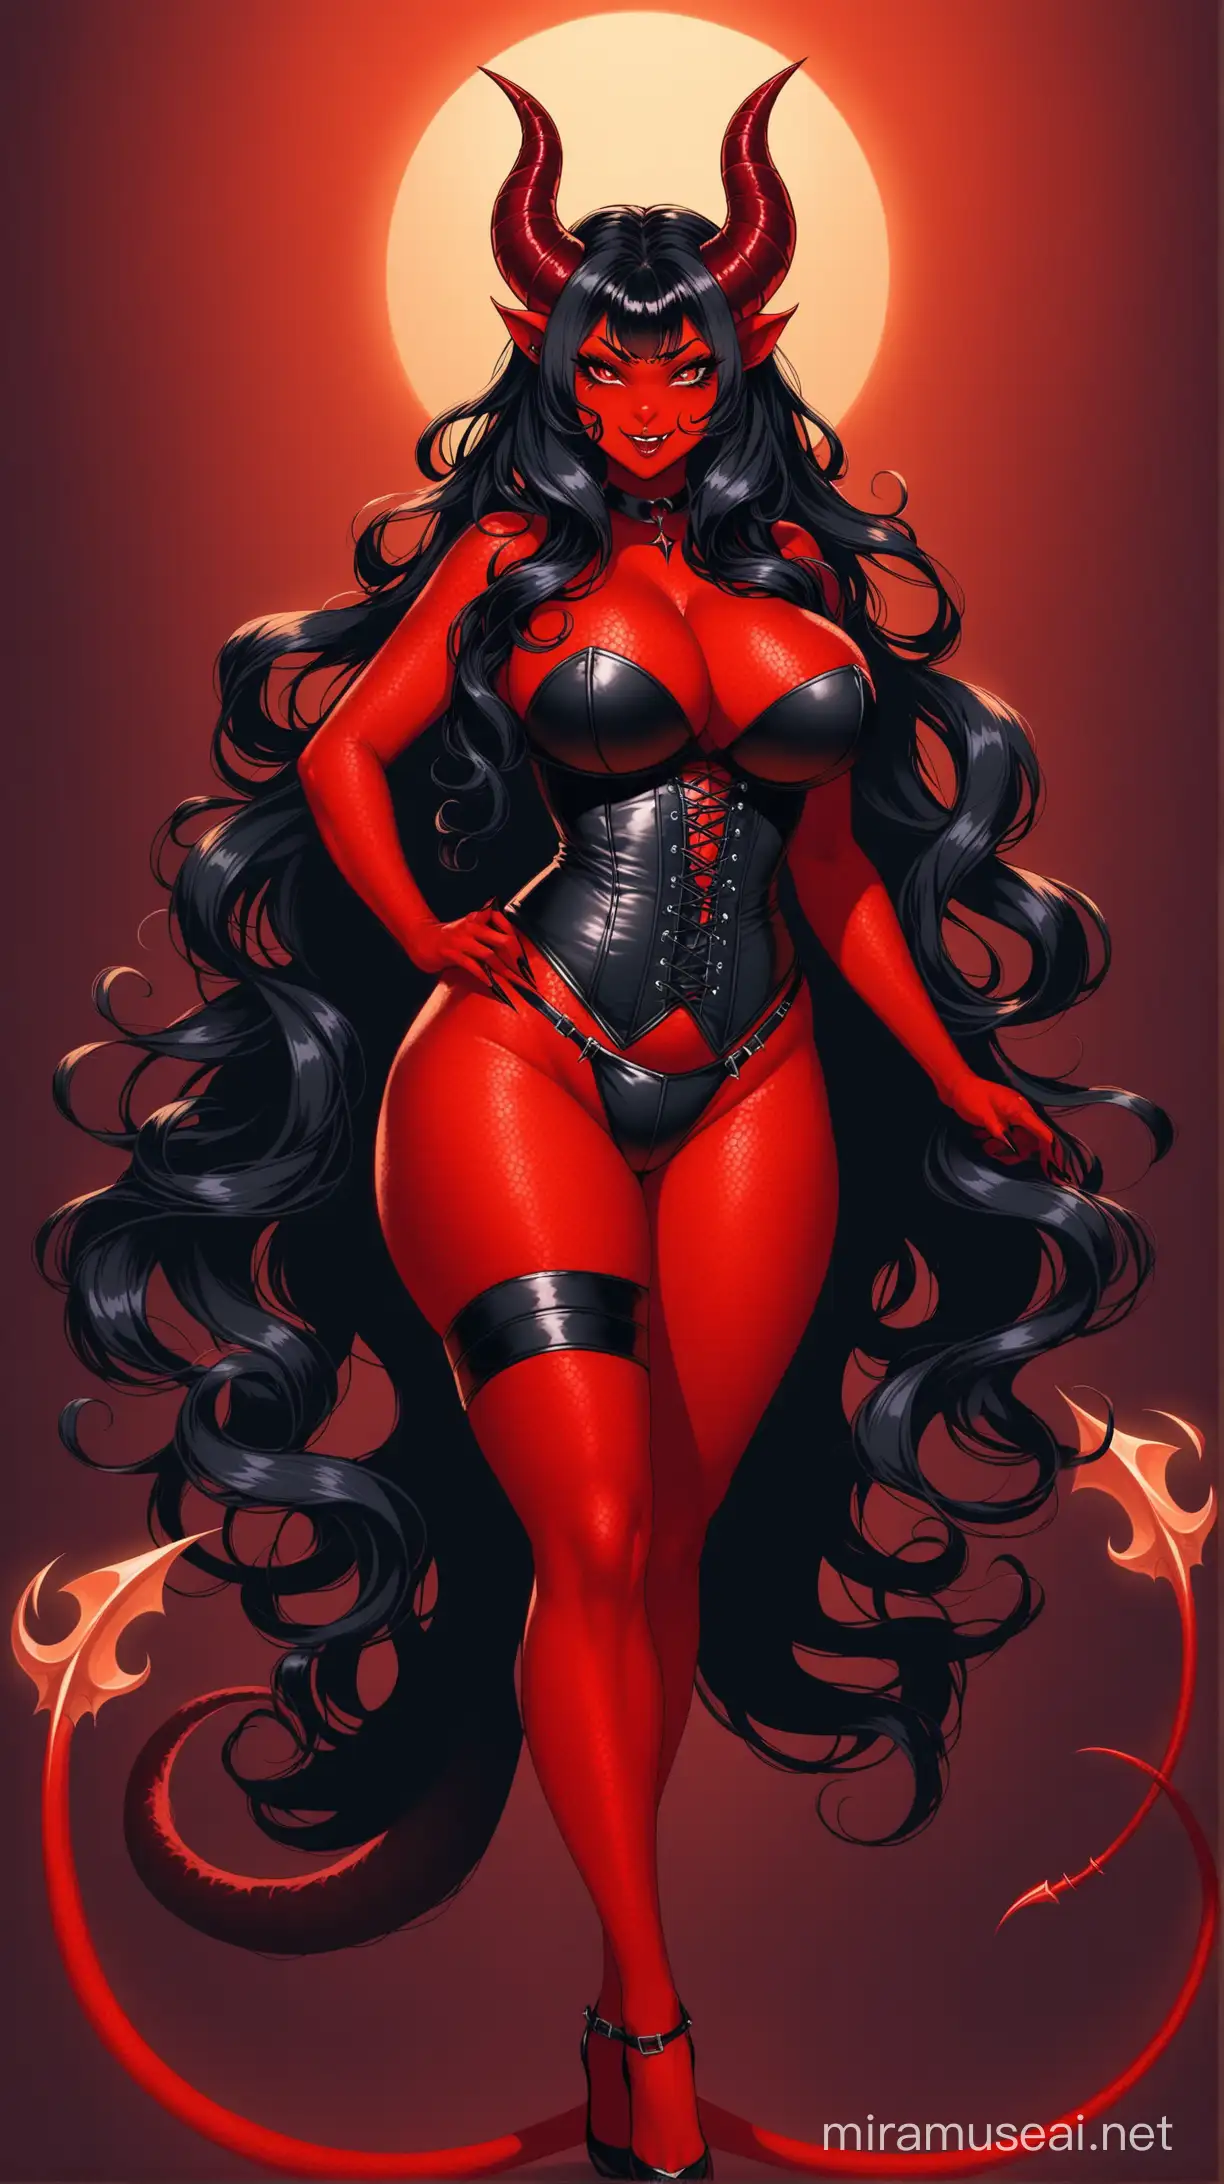 Alluring RedSkinned Deviless in Leather Corset with Horns and Tail